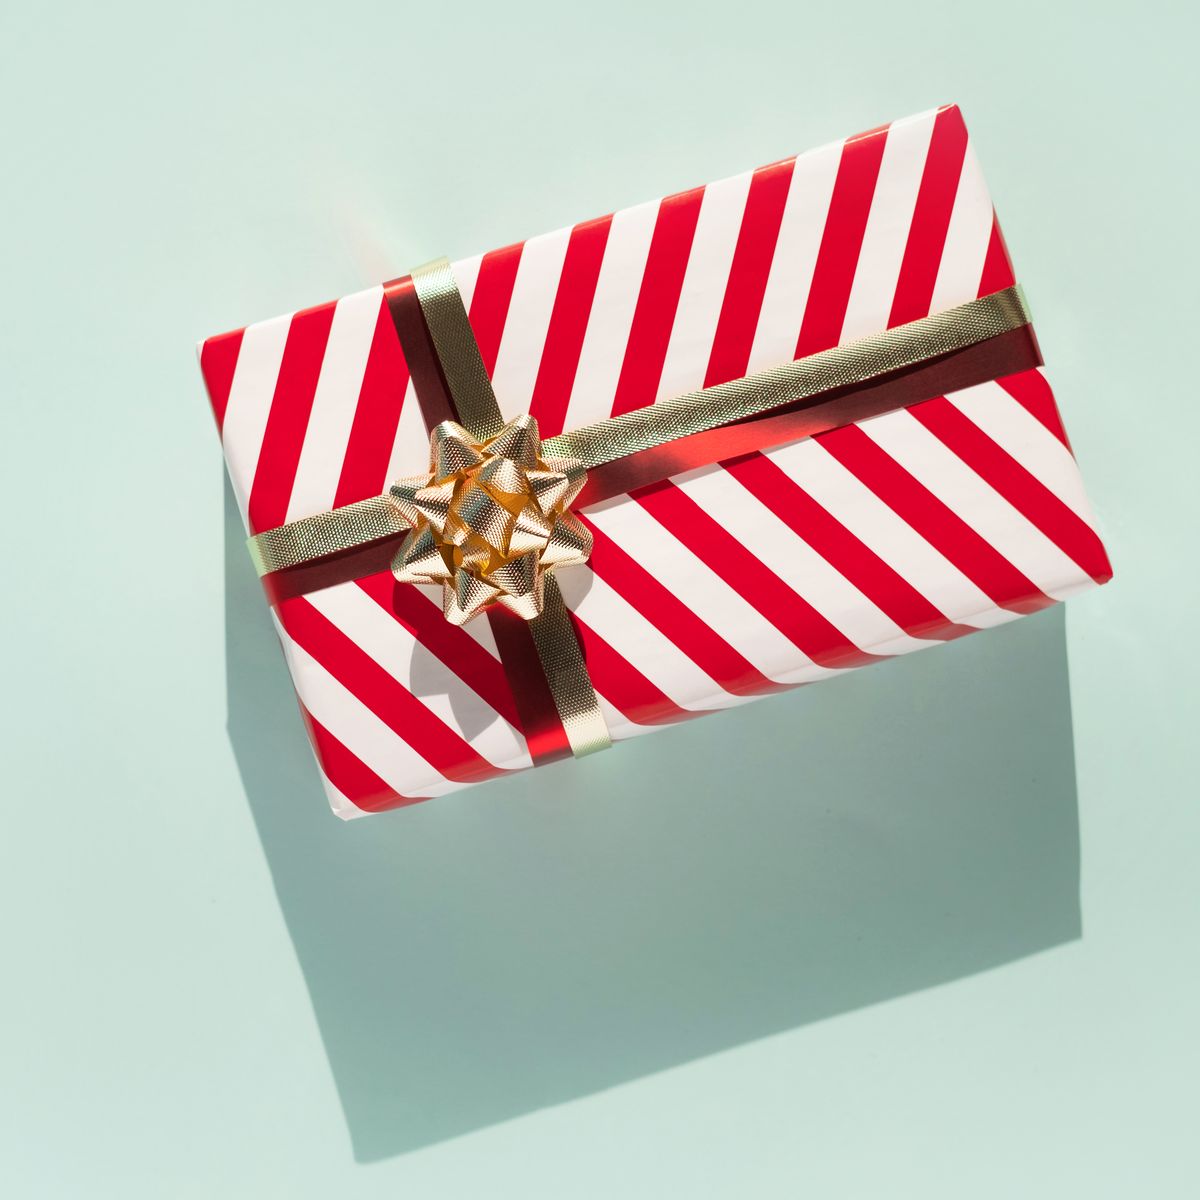 https://hips.hearstapps.com/hmg-prod/images/gift-box-with-white-red-striped-pattern-and-gold-royalty-free-image-1670275330.jpg?crop=0.66667xw:1xh;center,top&resize=1200:*